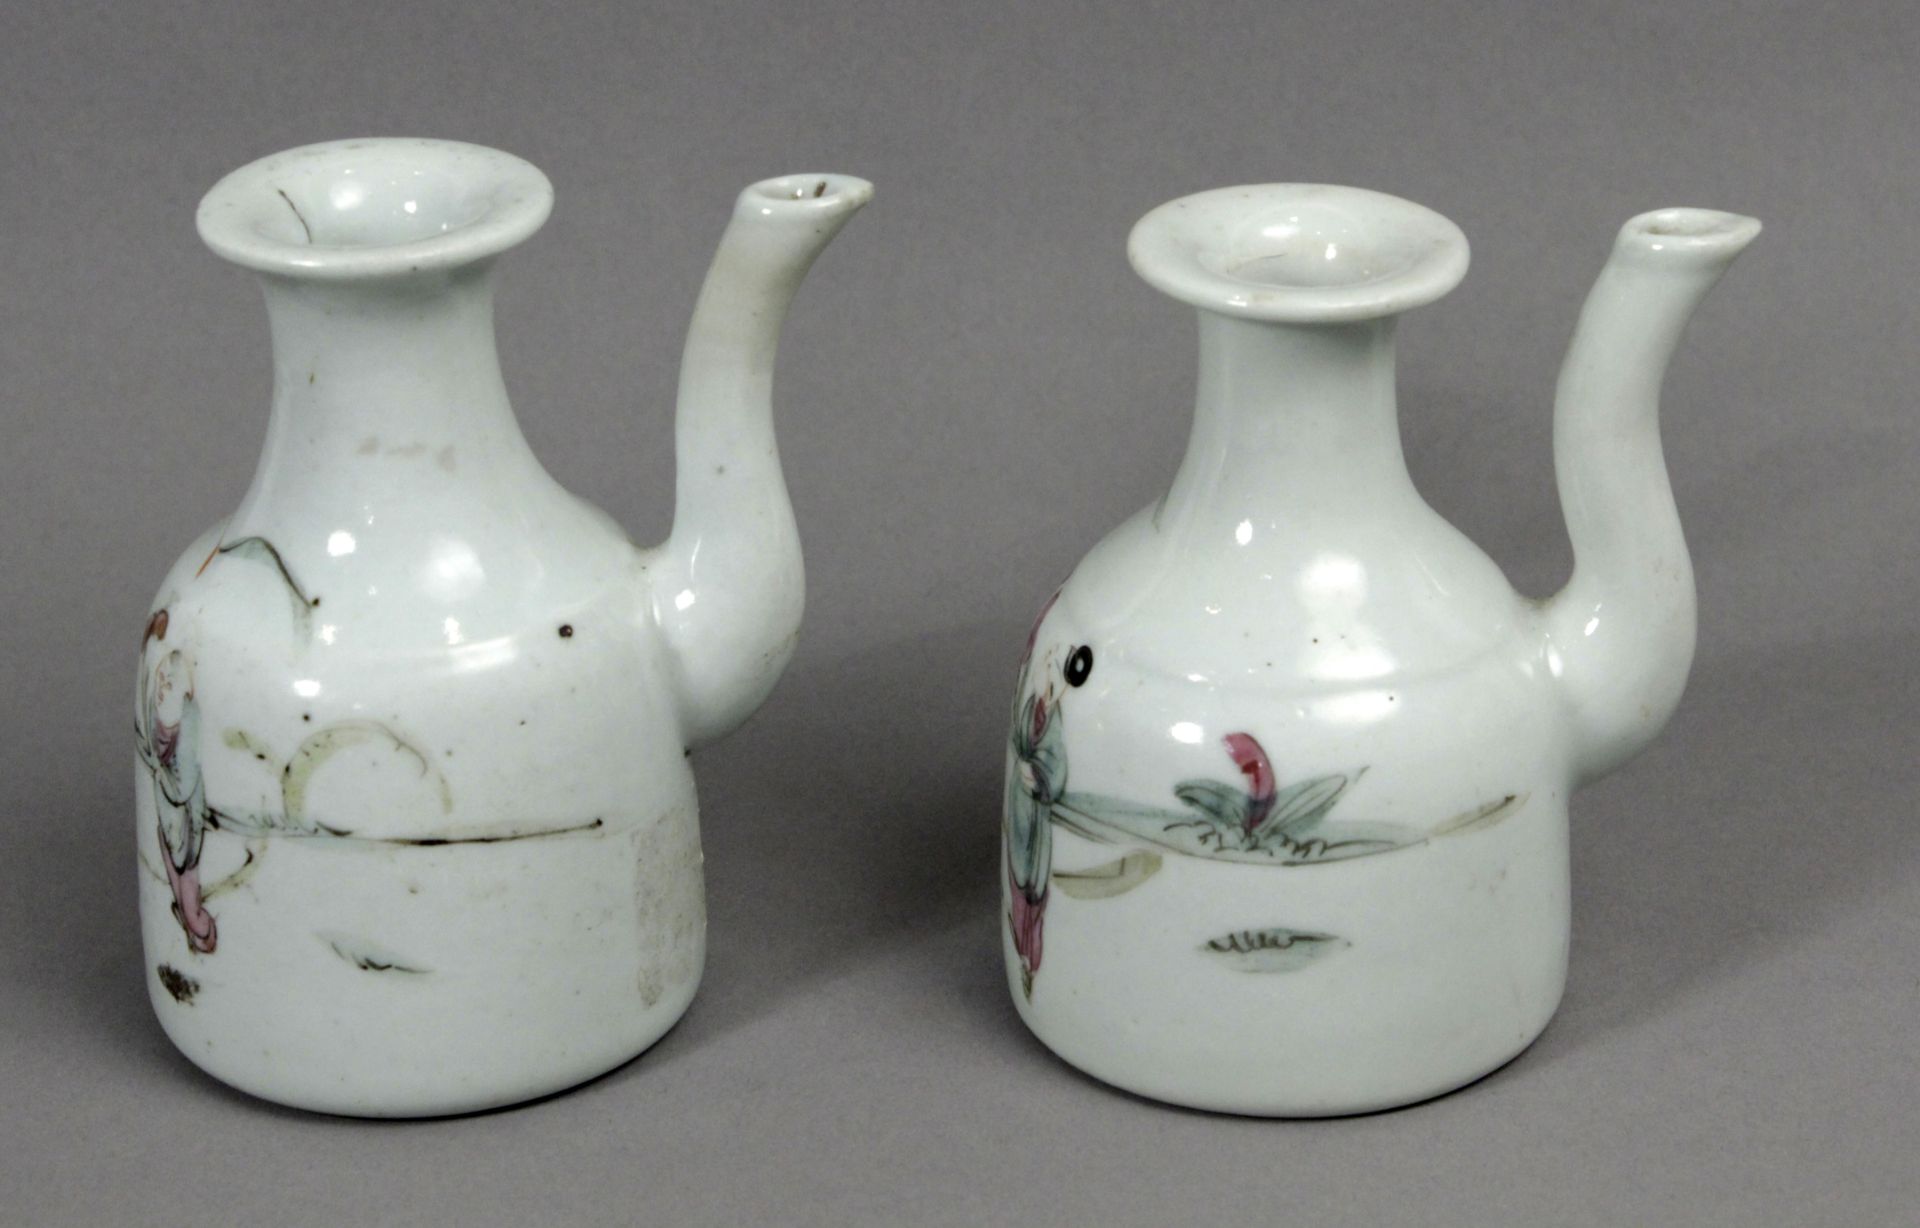 A pair of 18th century Chinese inkwells in polychromed porcelain